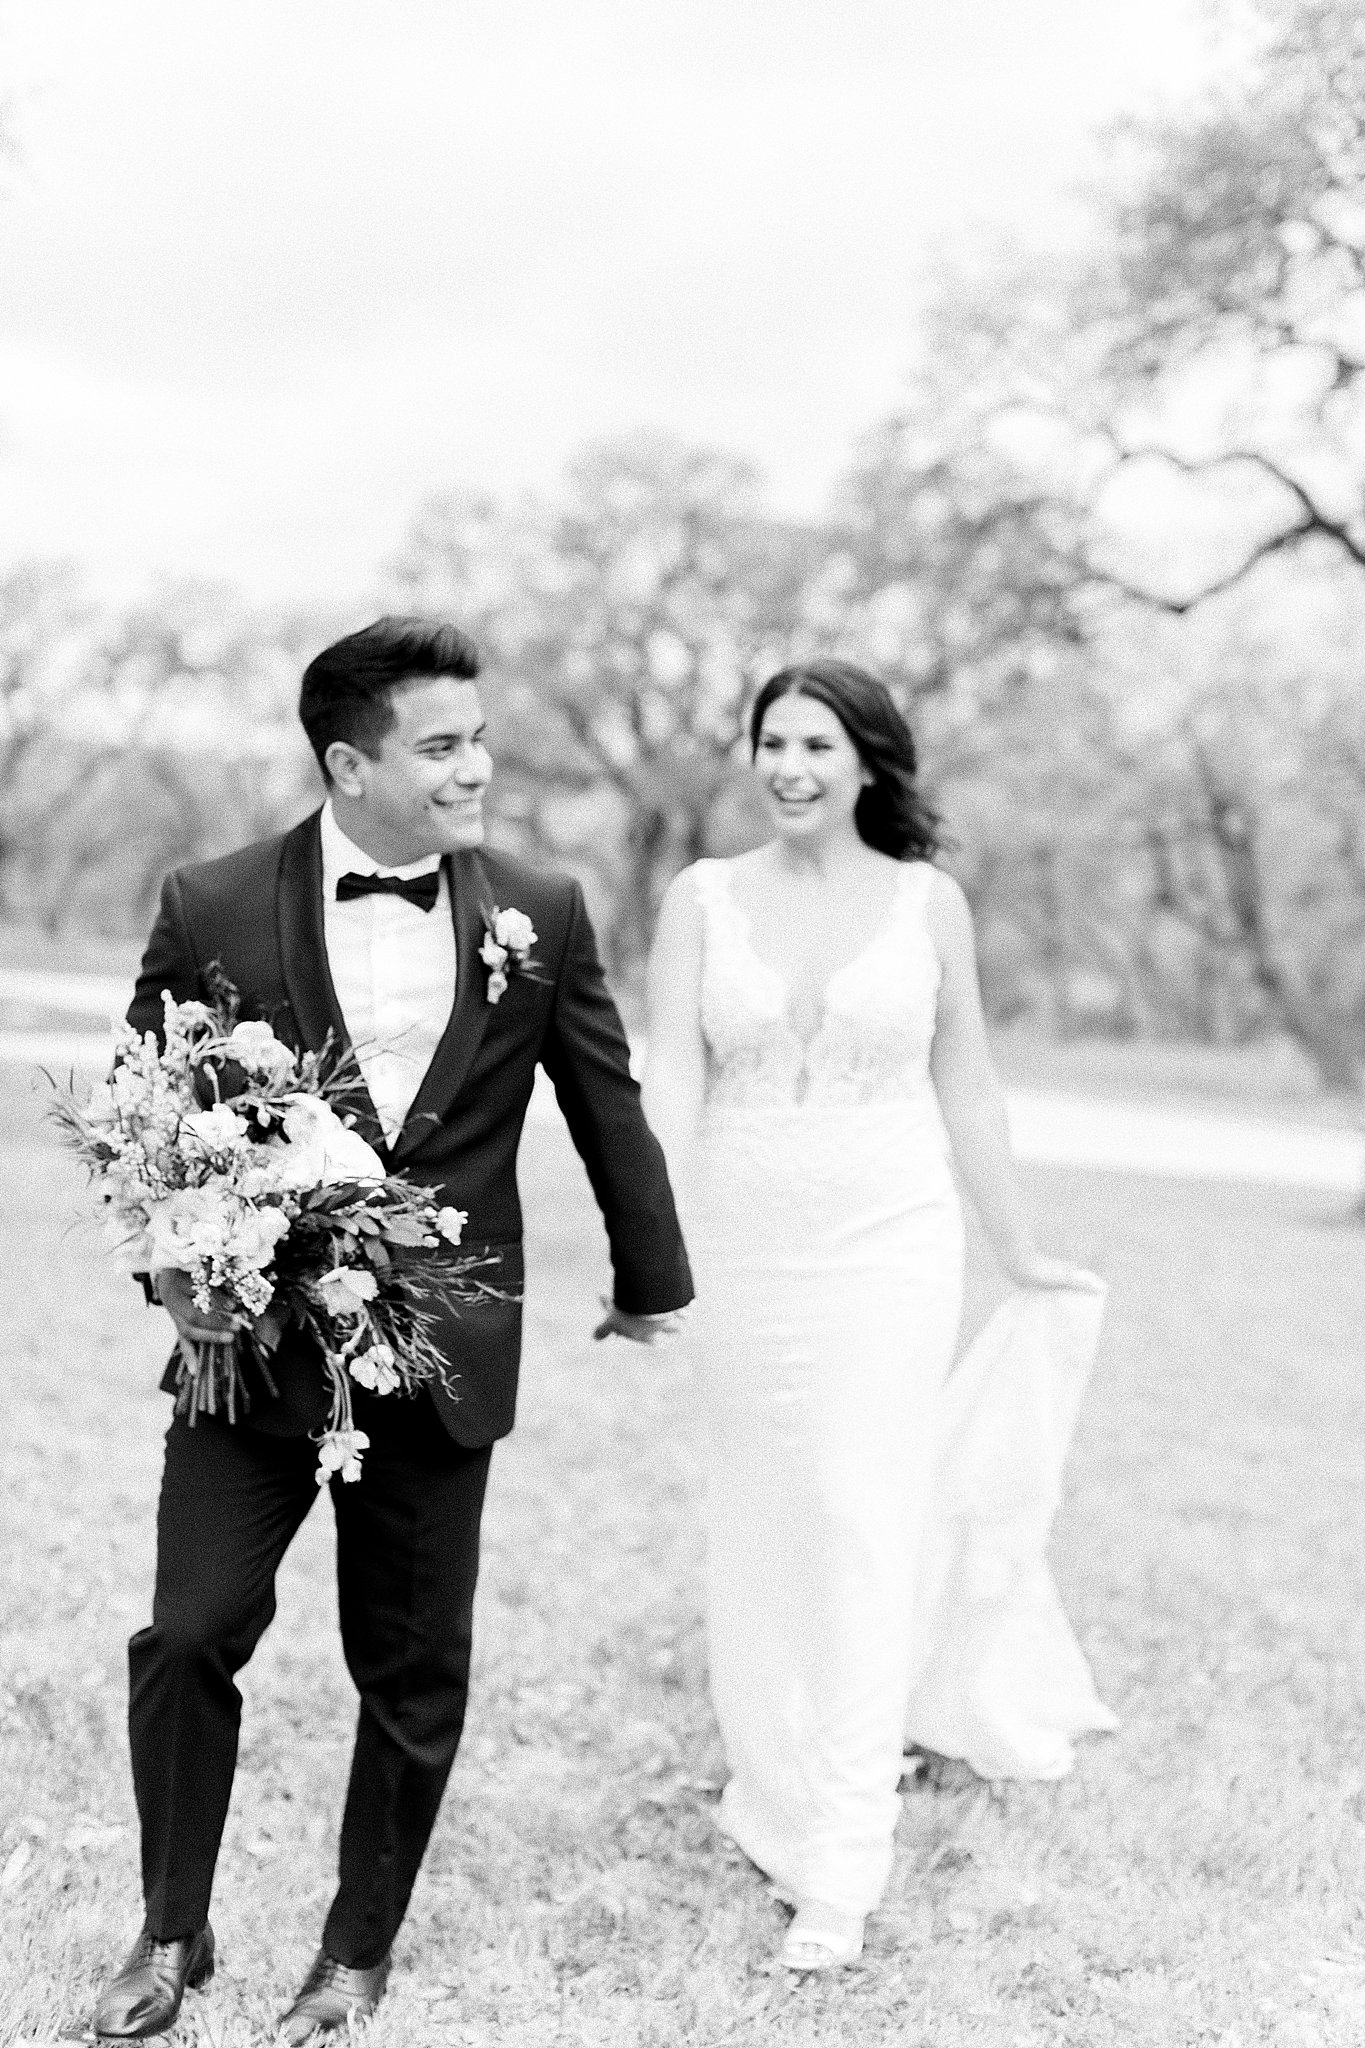 happy bride and groom at oakfire ridge wedding captured by Anna Kay photography, Black and White Film Image of Bride and Groom